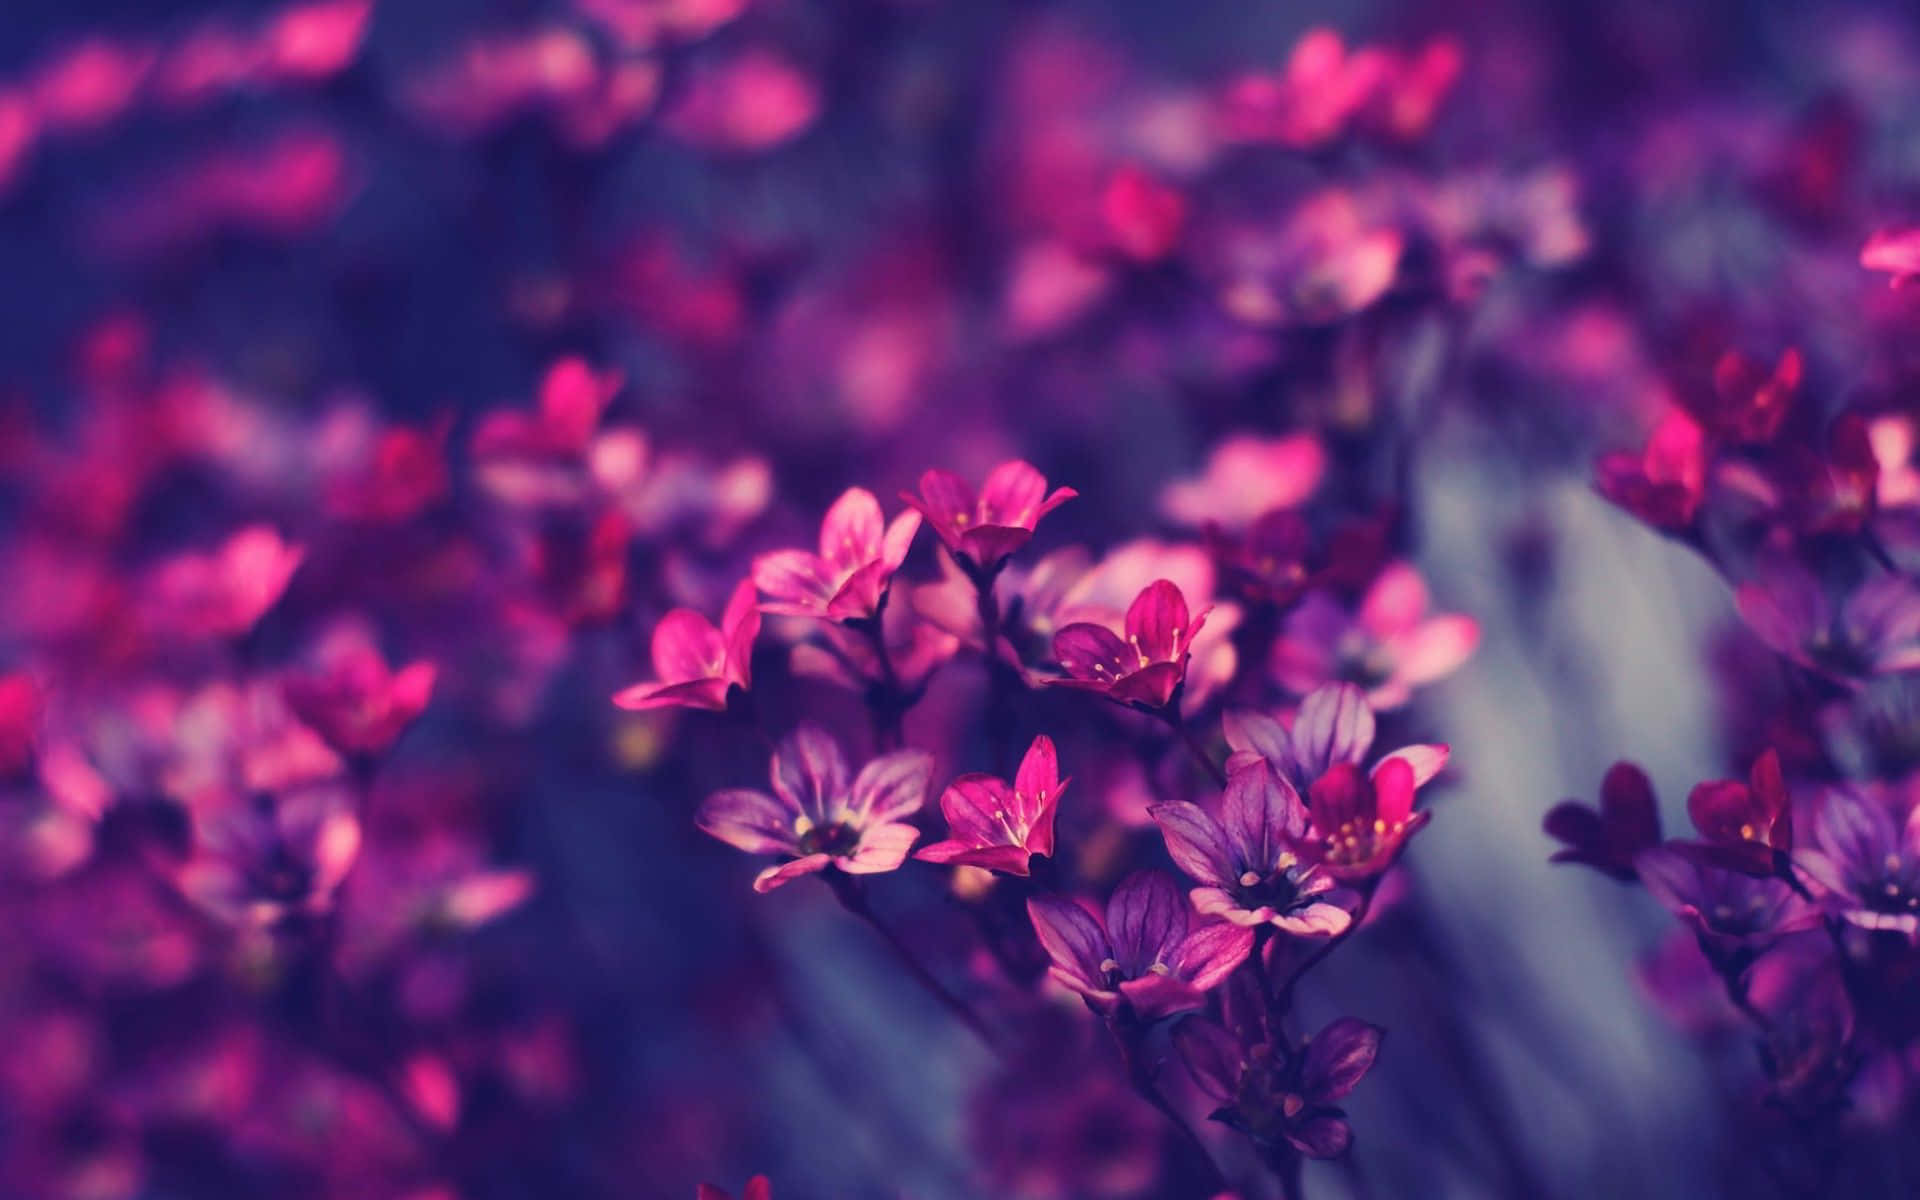 Enjoy A Breath of Spring with These Colorful Flowers Wallpaper